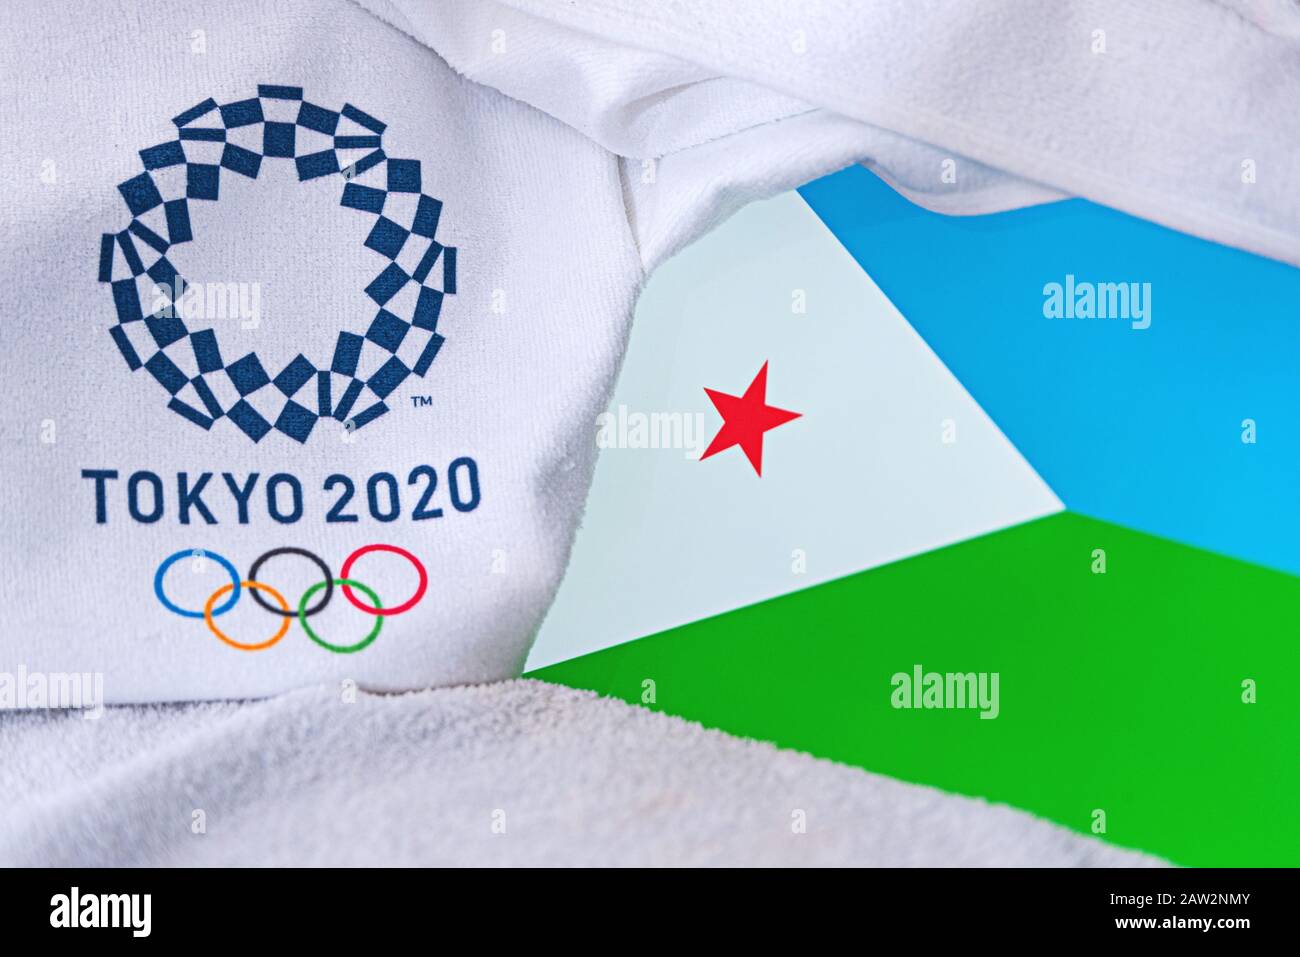 TOKYO, JAPAN, FEBRUARY. 4, 2020: Djibouti National flag, official logo of summer olympic games in Tokyo 2020. White background Stock Photo